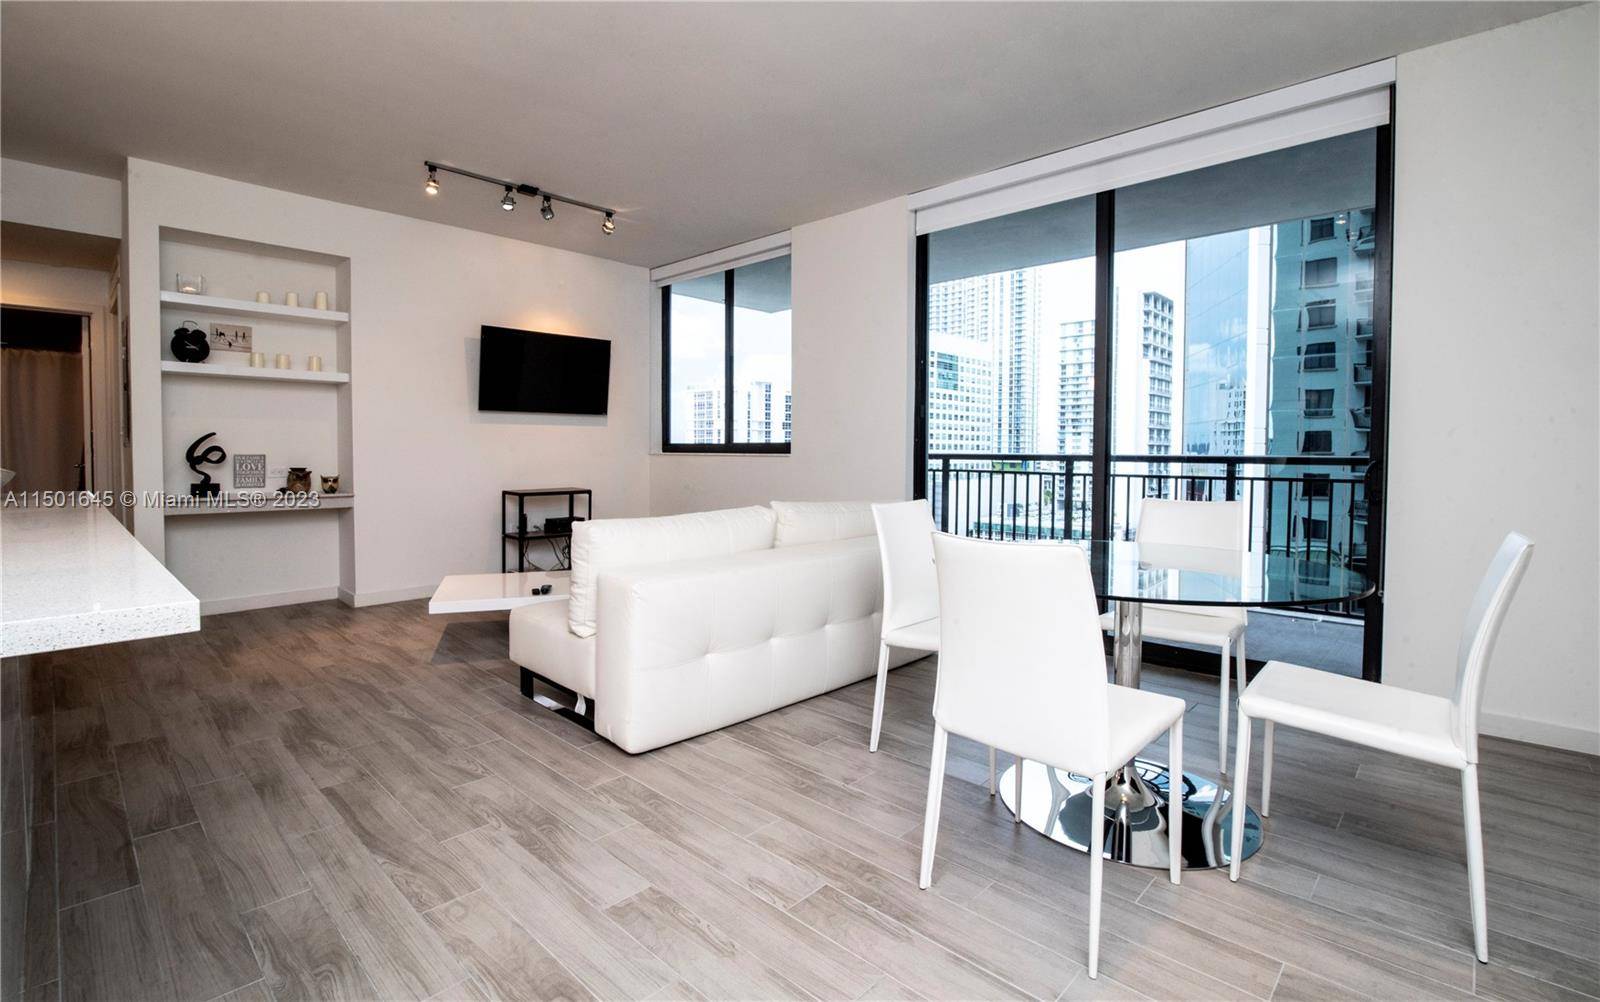 Beautiful and Modern 2 bedroom 2 bathroom Apartment in the heart of Brickell.